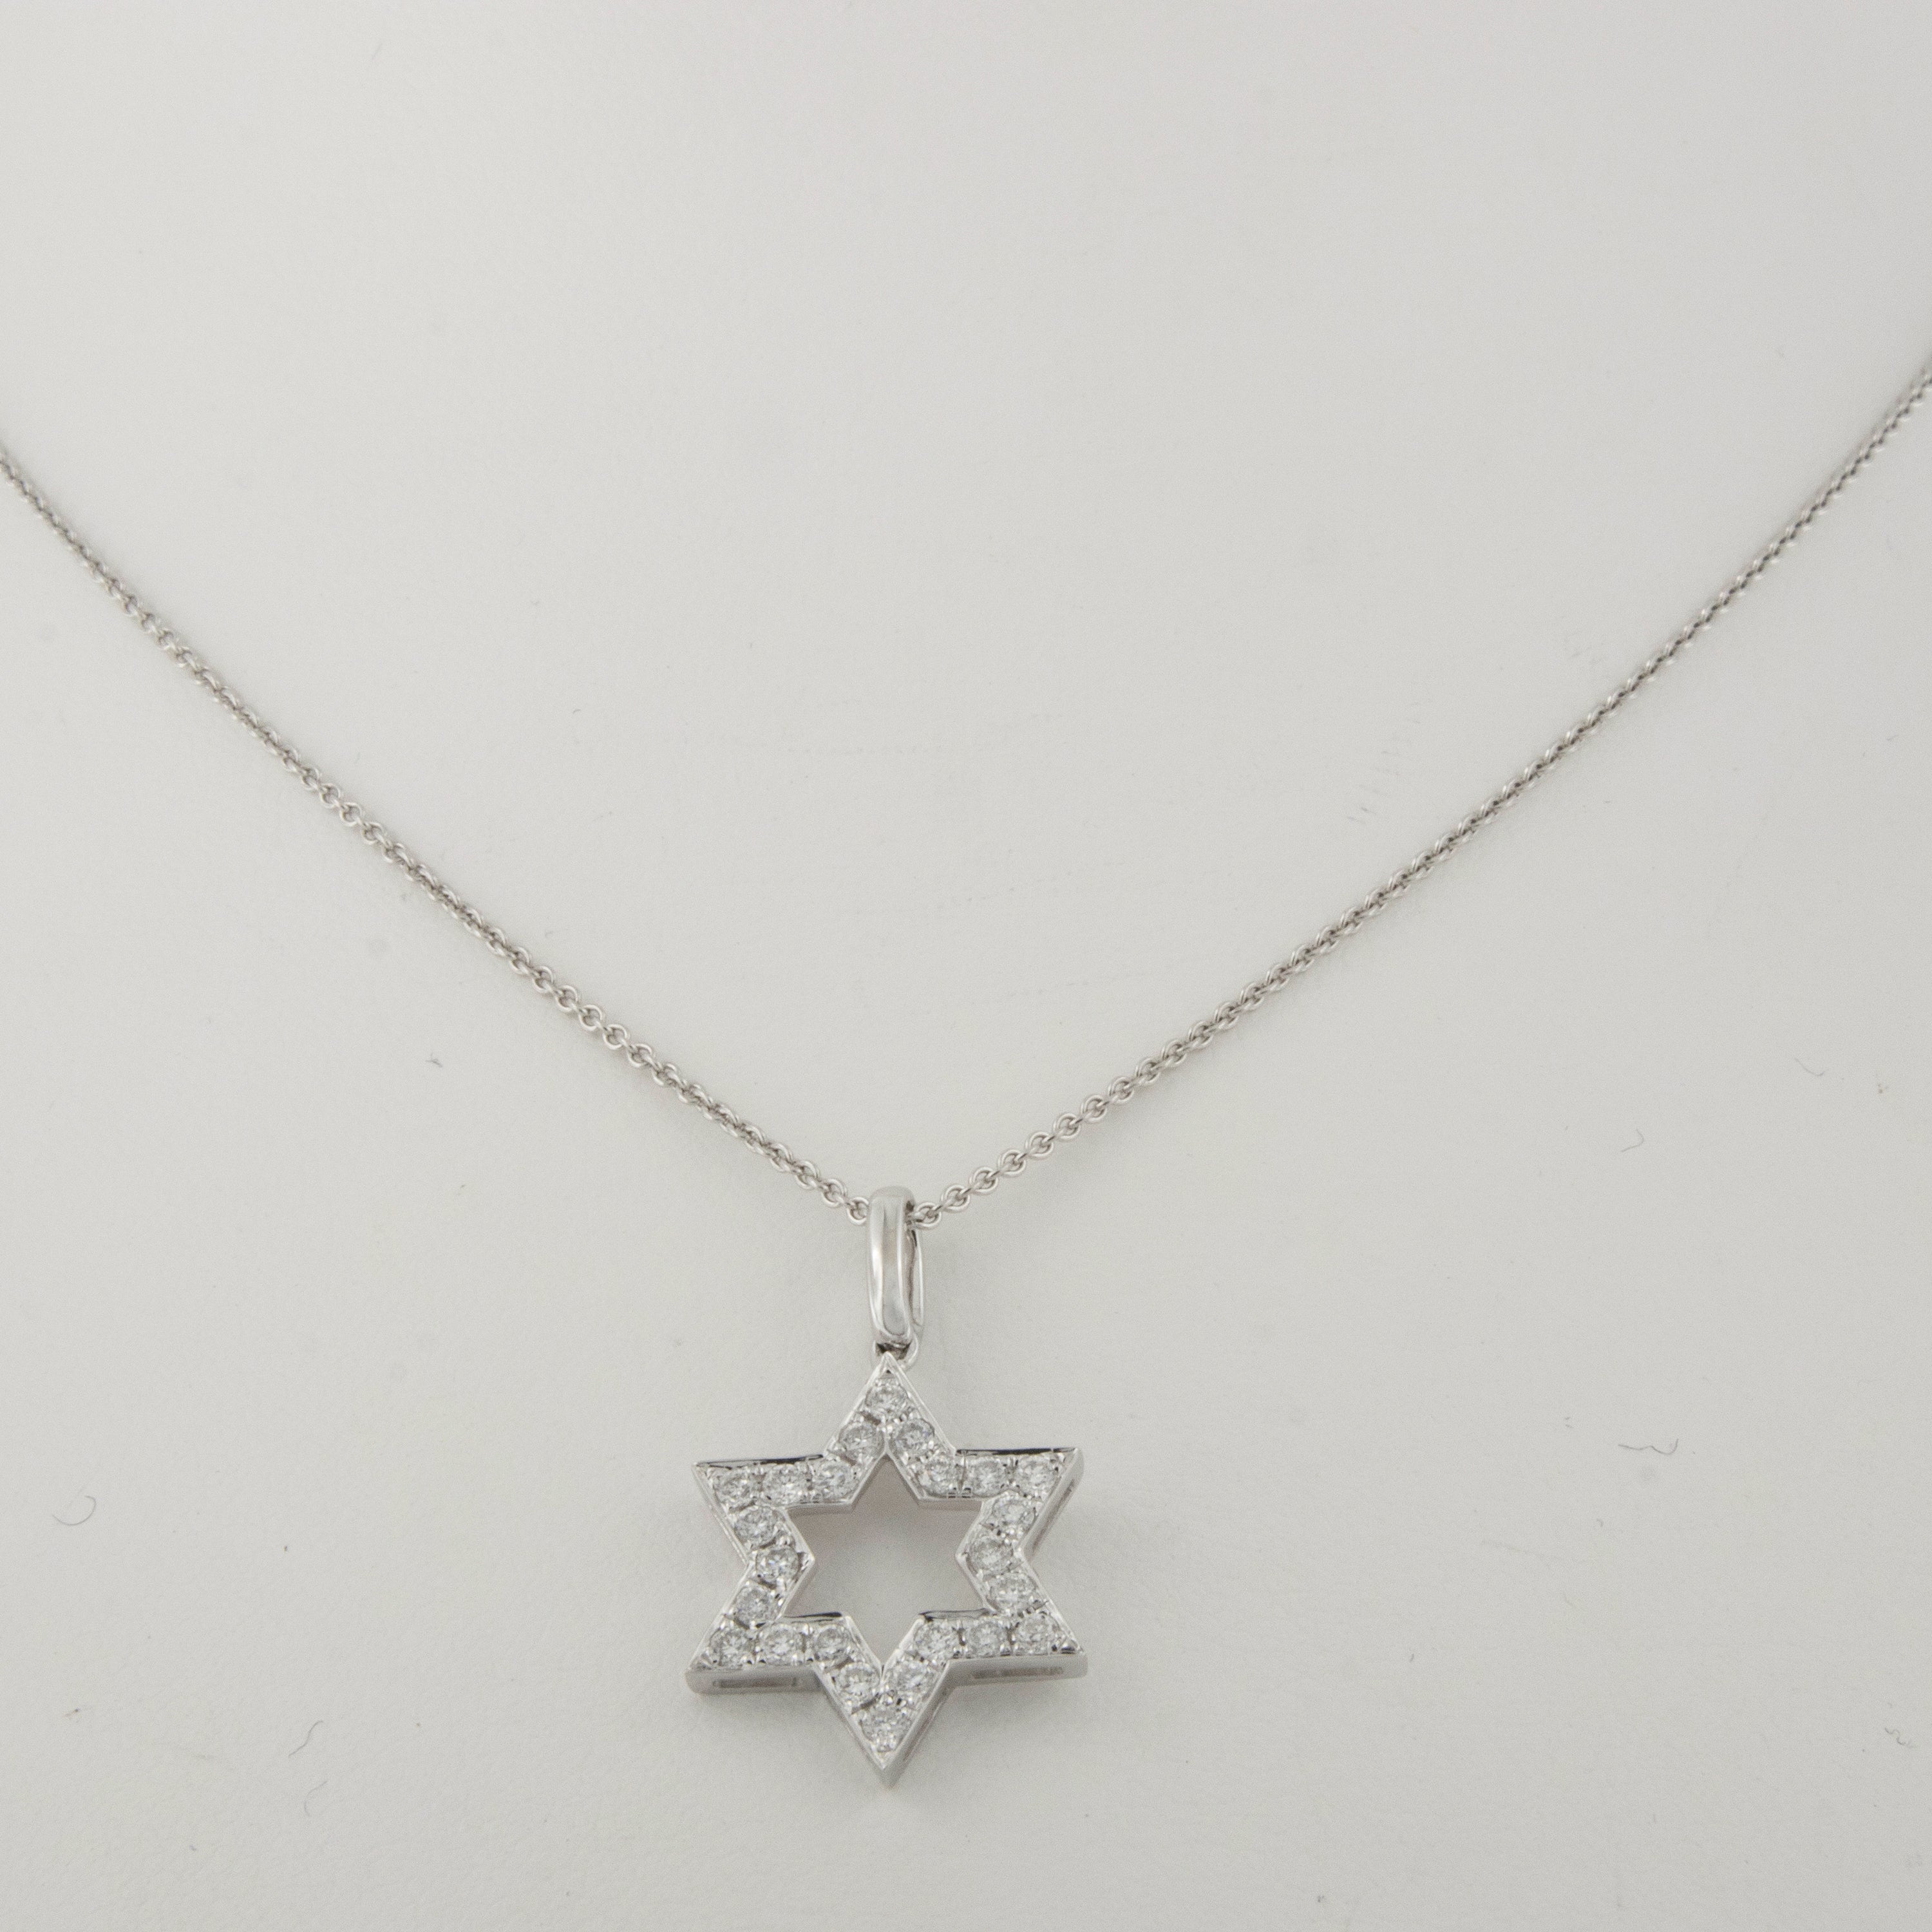 This is the perfect size for everyday and evening wear. This 18K white gold diamond Star David is pave' set with 24 F-G VS diamonds = 0.43 Cttw. and is suspended on a 18 KWG adjustable chain 18